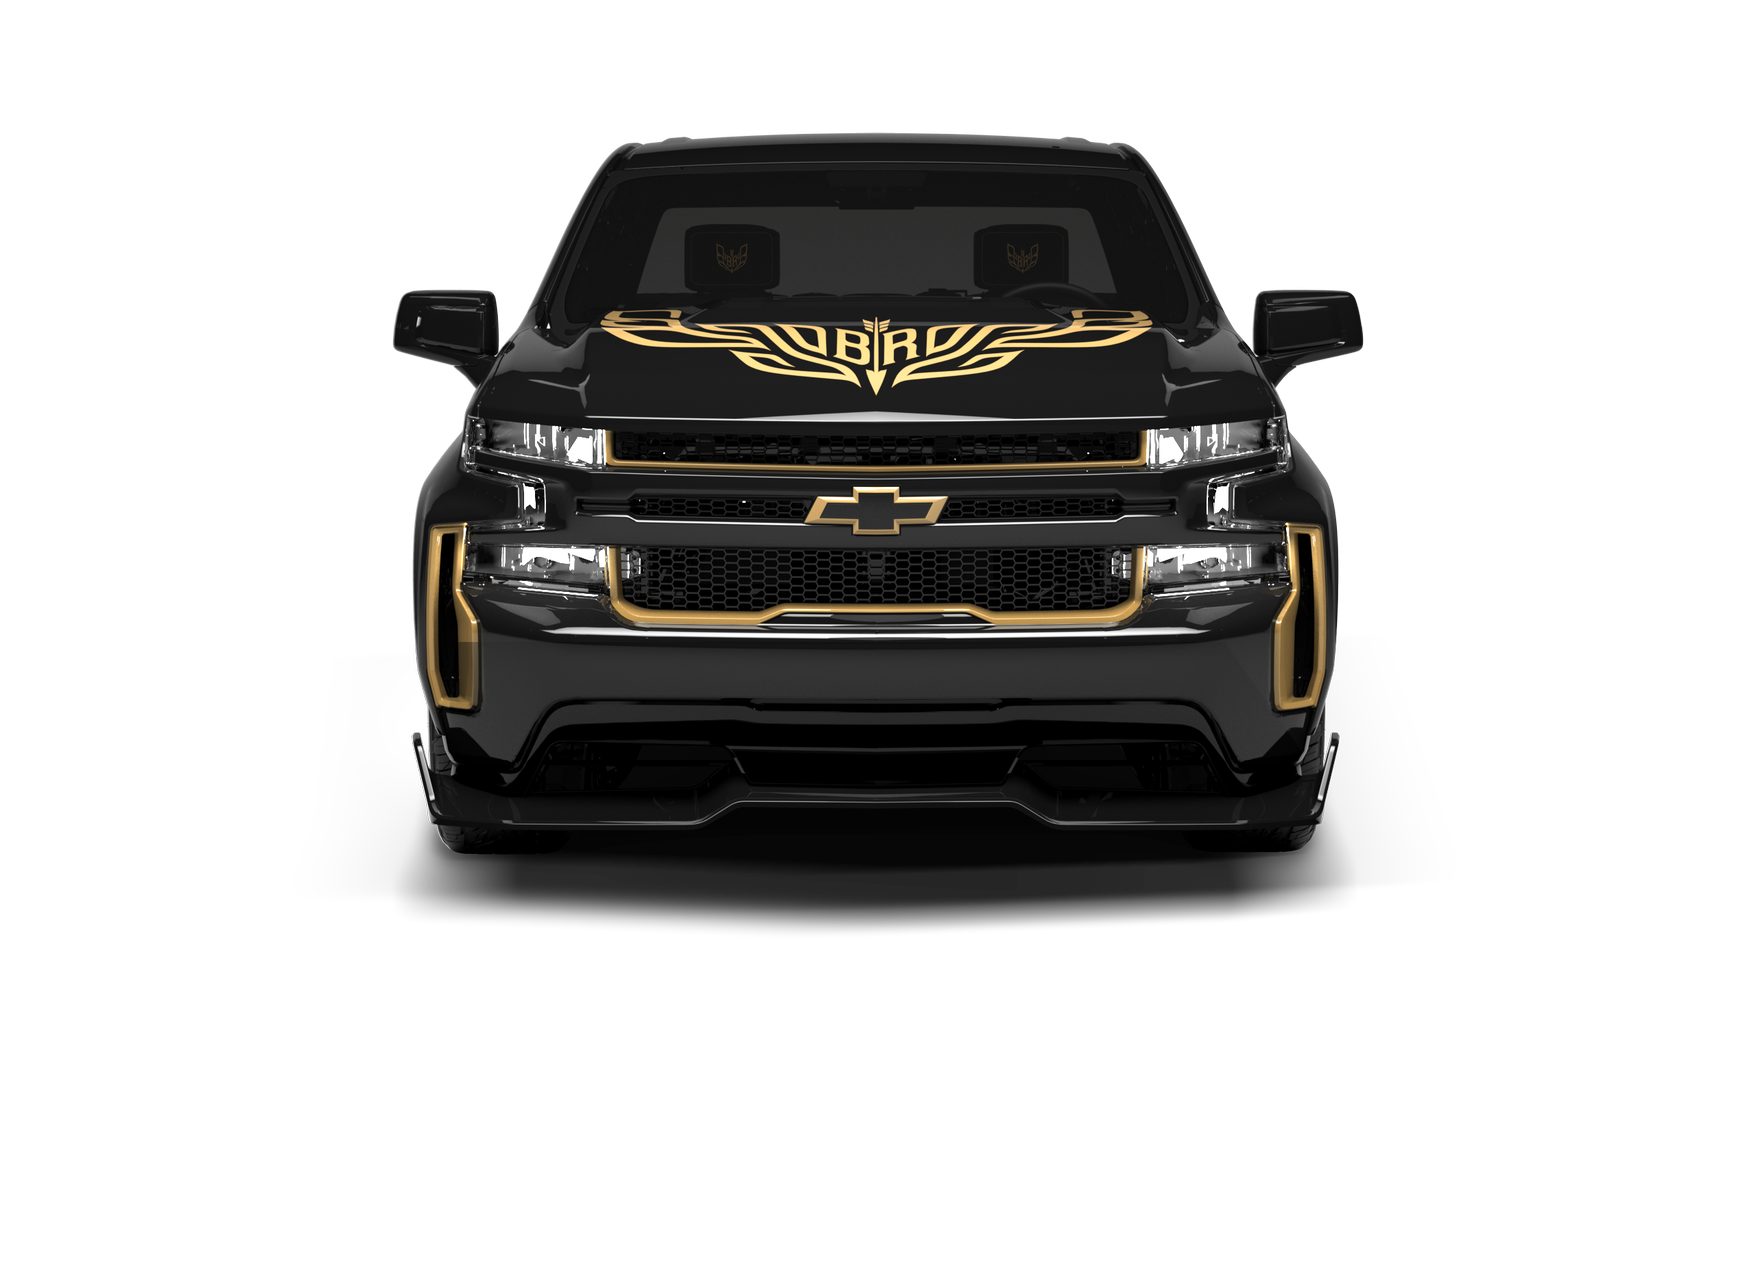 A hand-painted wreath hood graphic on the new Bandit Truck pays direct homage to Burt Reynolds and the authenticity of the 1977 Bandit car.